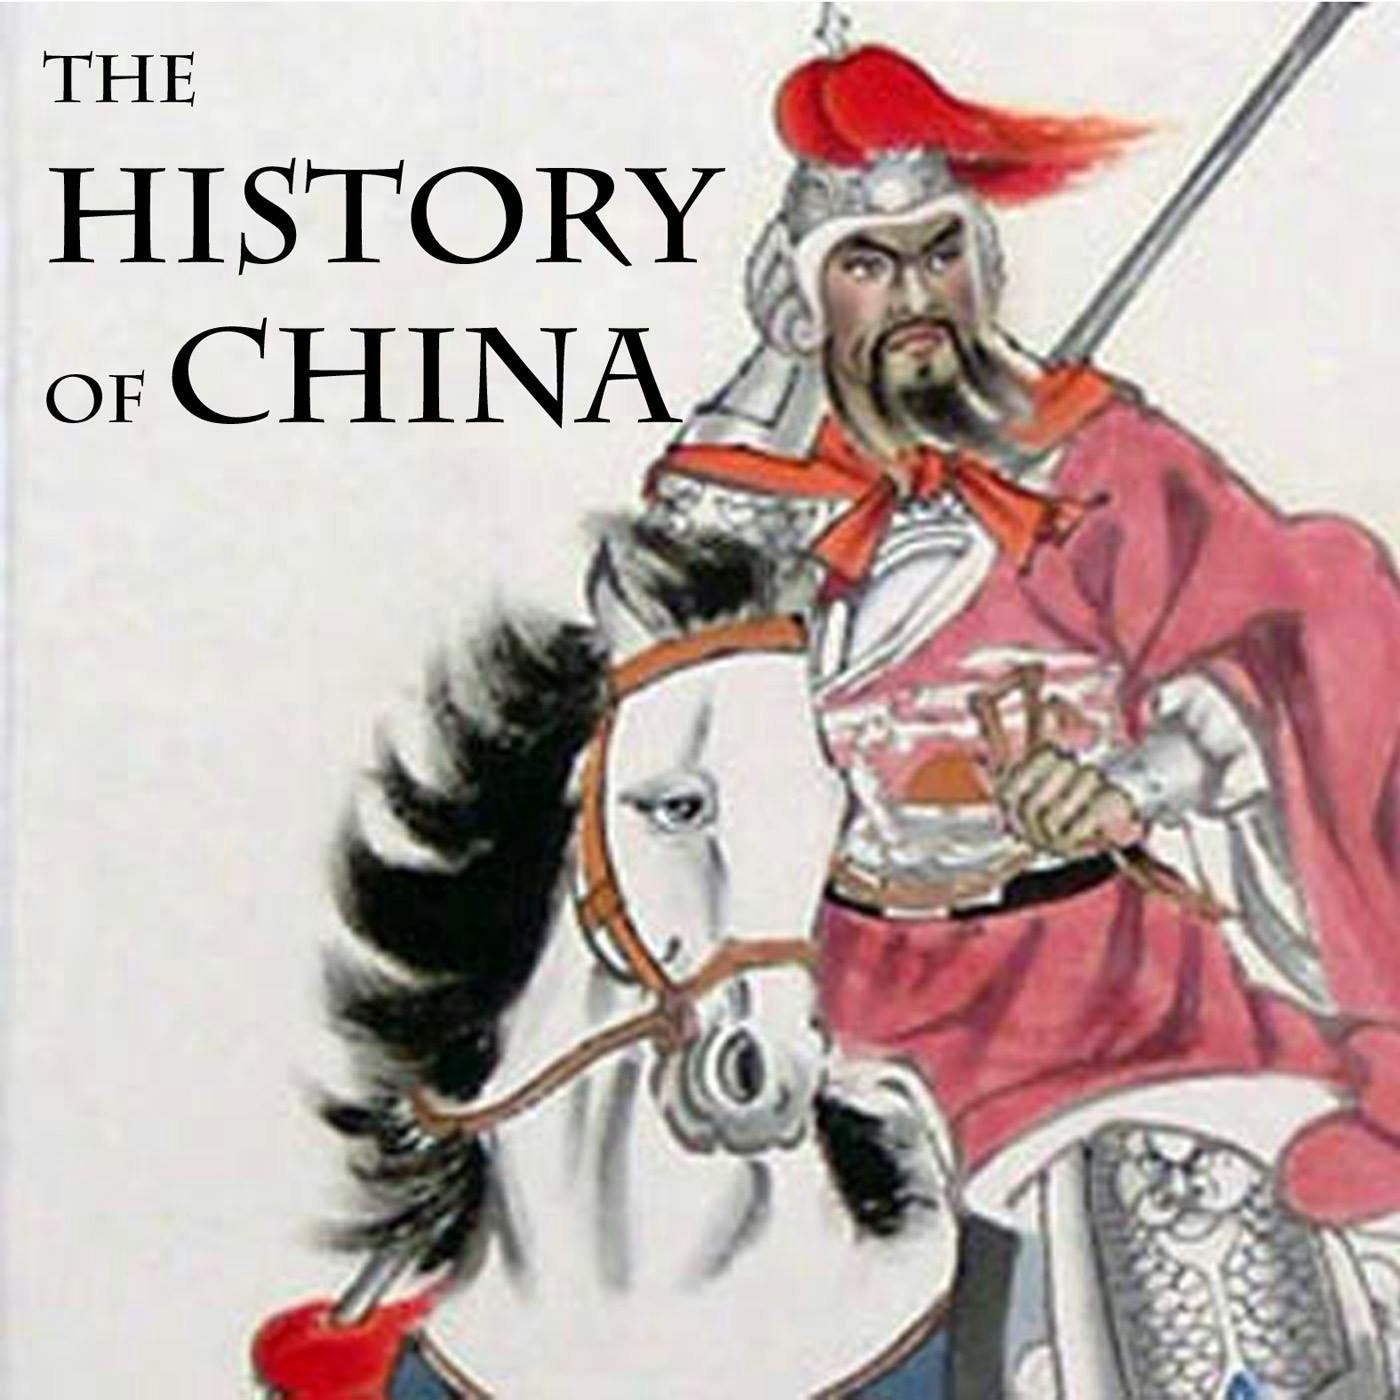 The History of China podcast